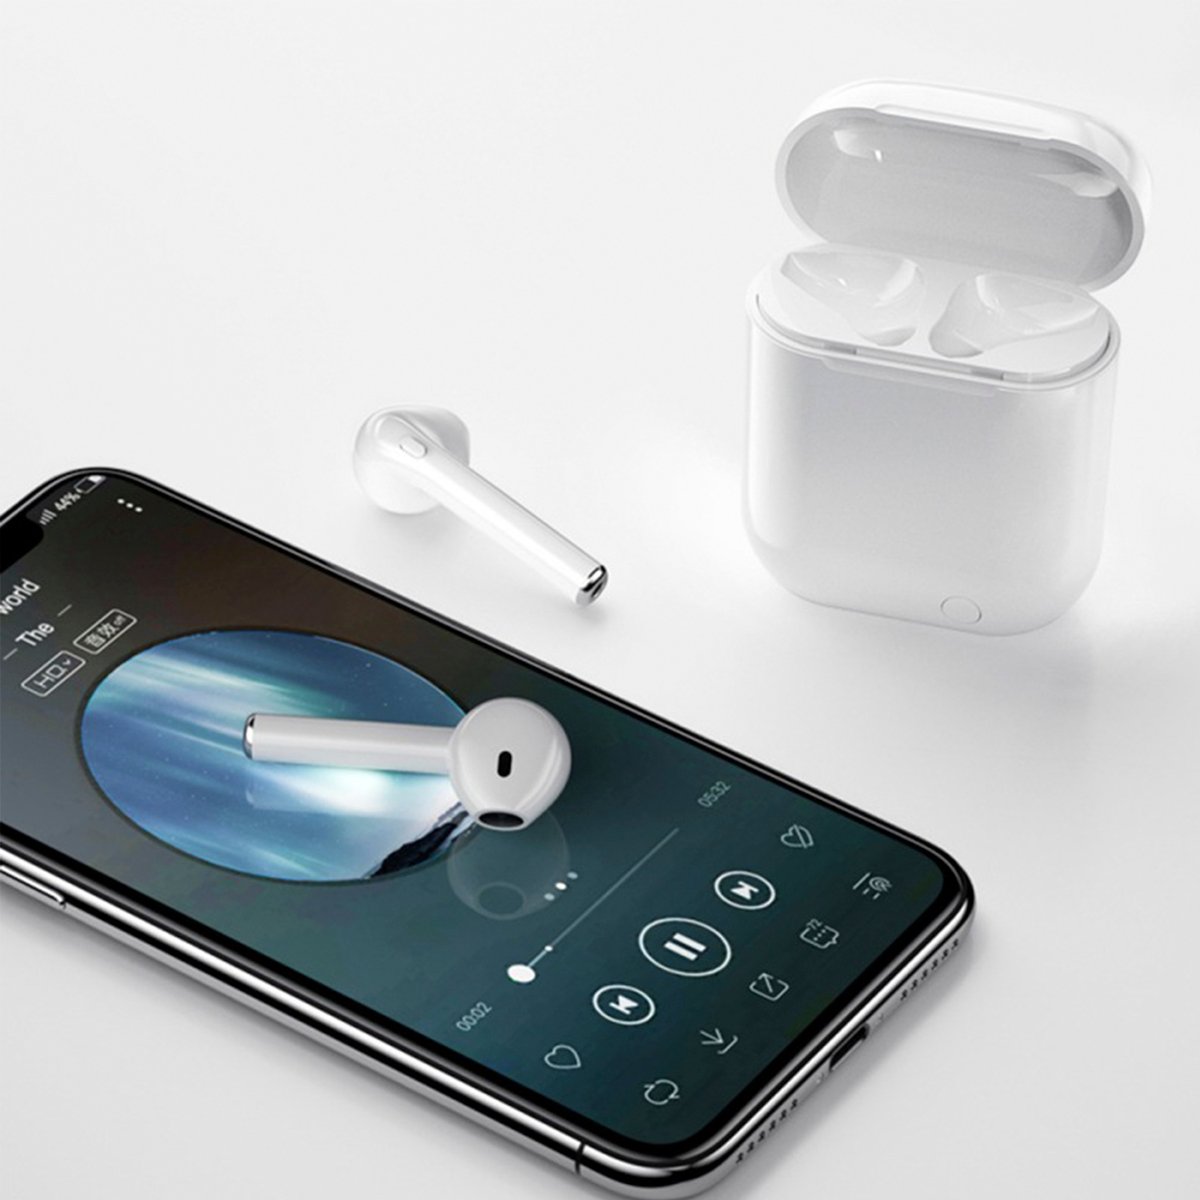 Bluetooth Earbuds with Charging Case TWSF14